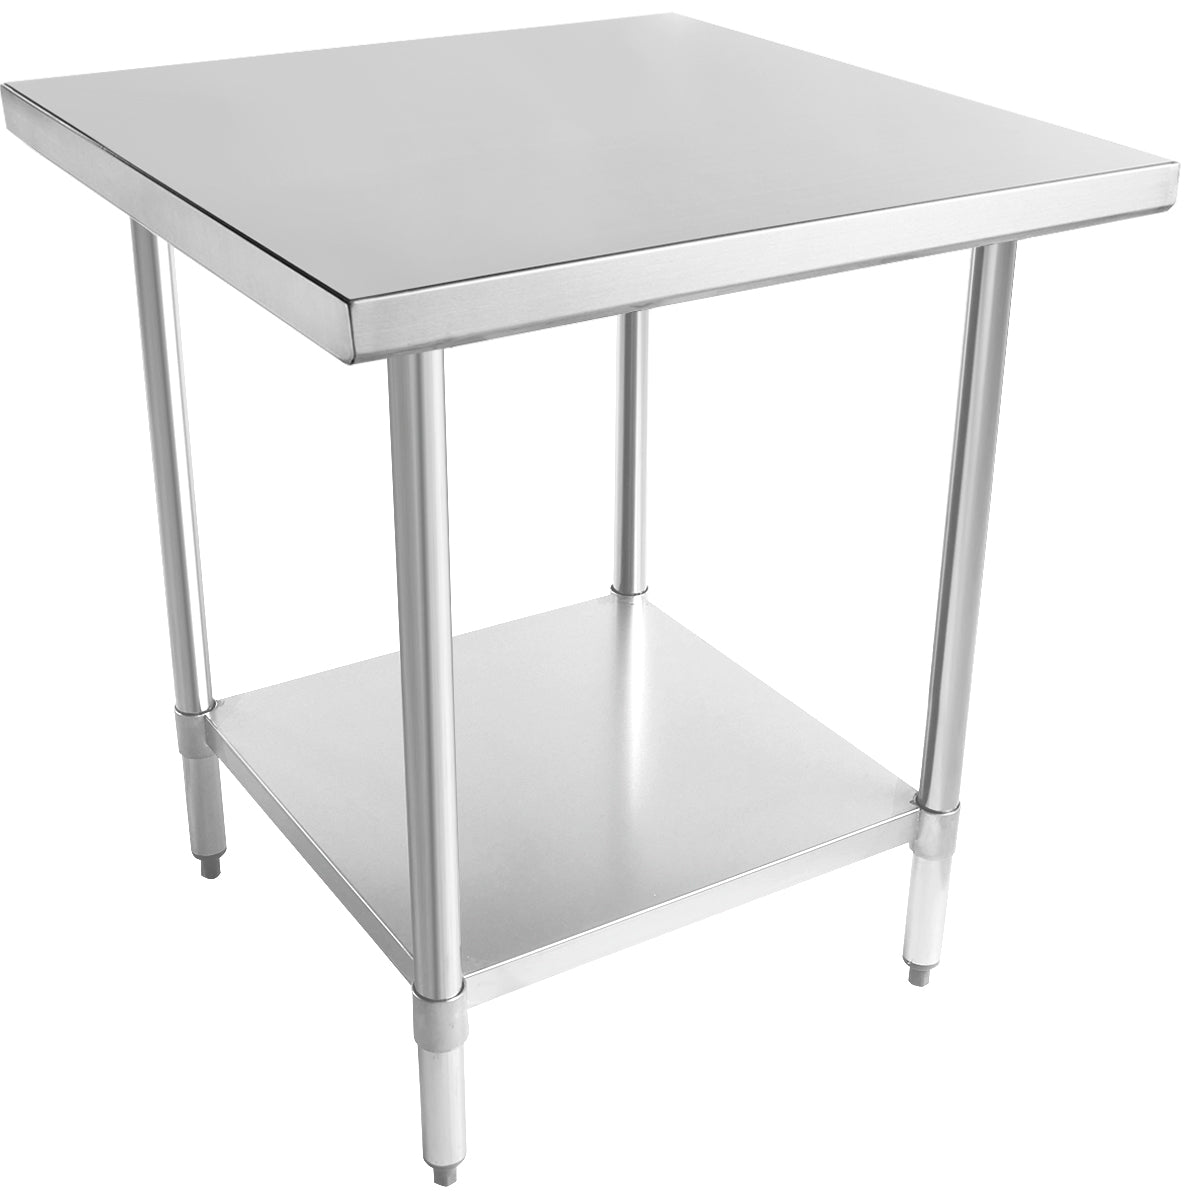 Empura 30" x 30" 18-Gauge 304 Stainless Steel Commercial Work Table with Flat Top Galvanized Legs and Undershelf